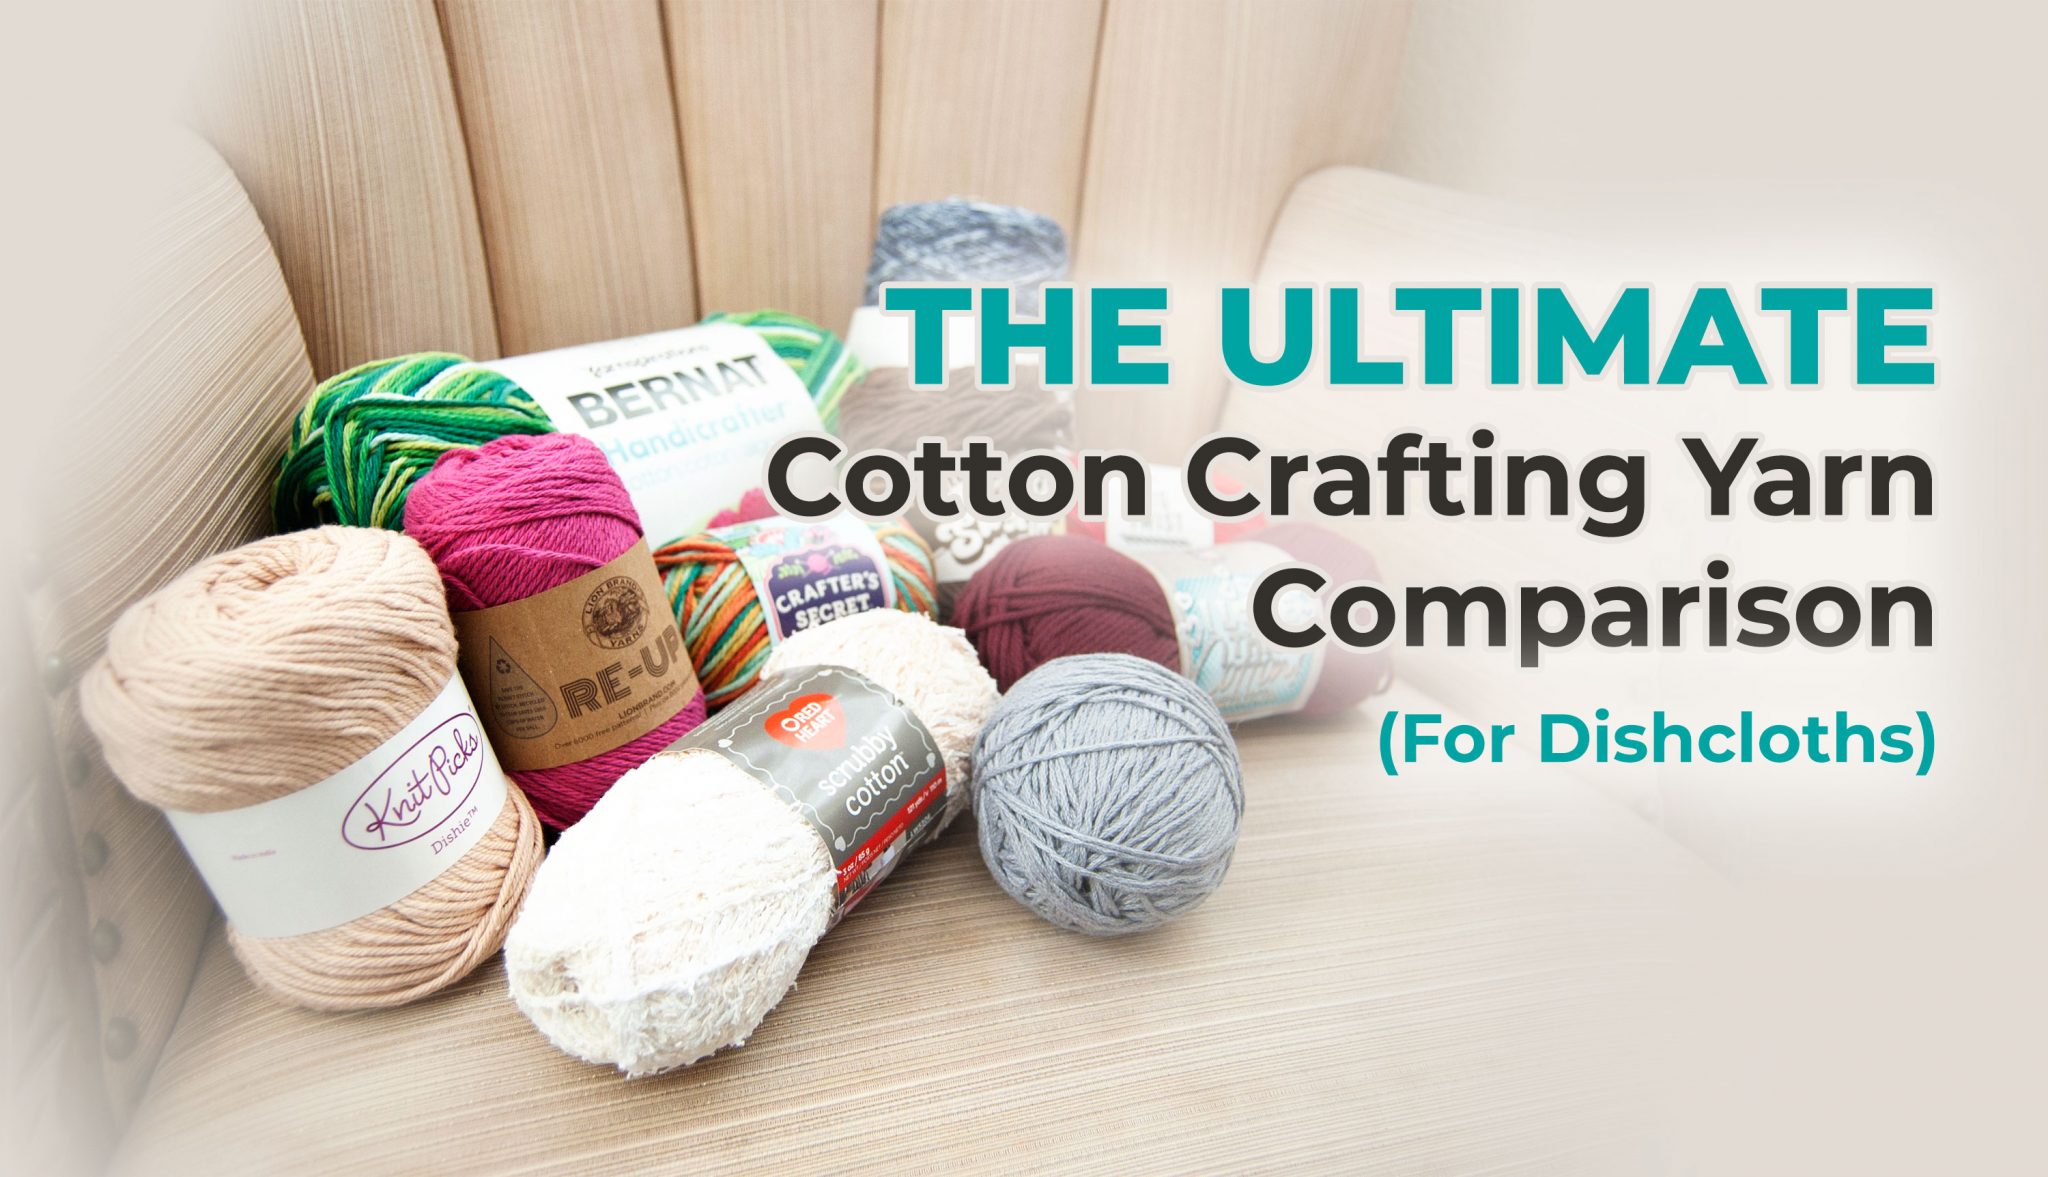 The Ultimate Cotton Crafting Yarn Comparison (for Dishcloths